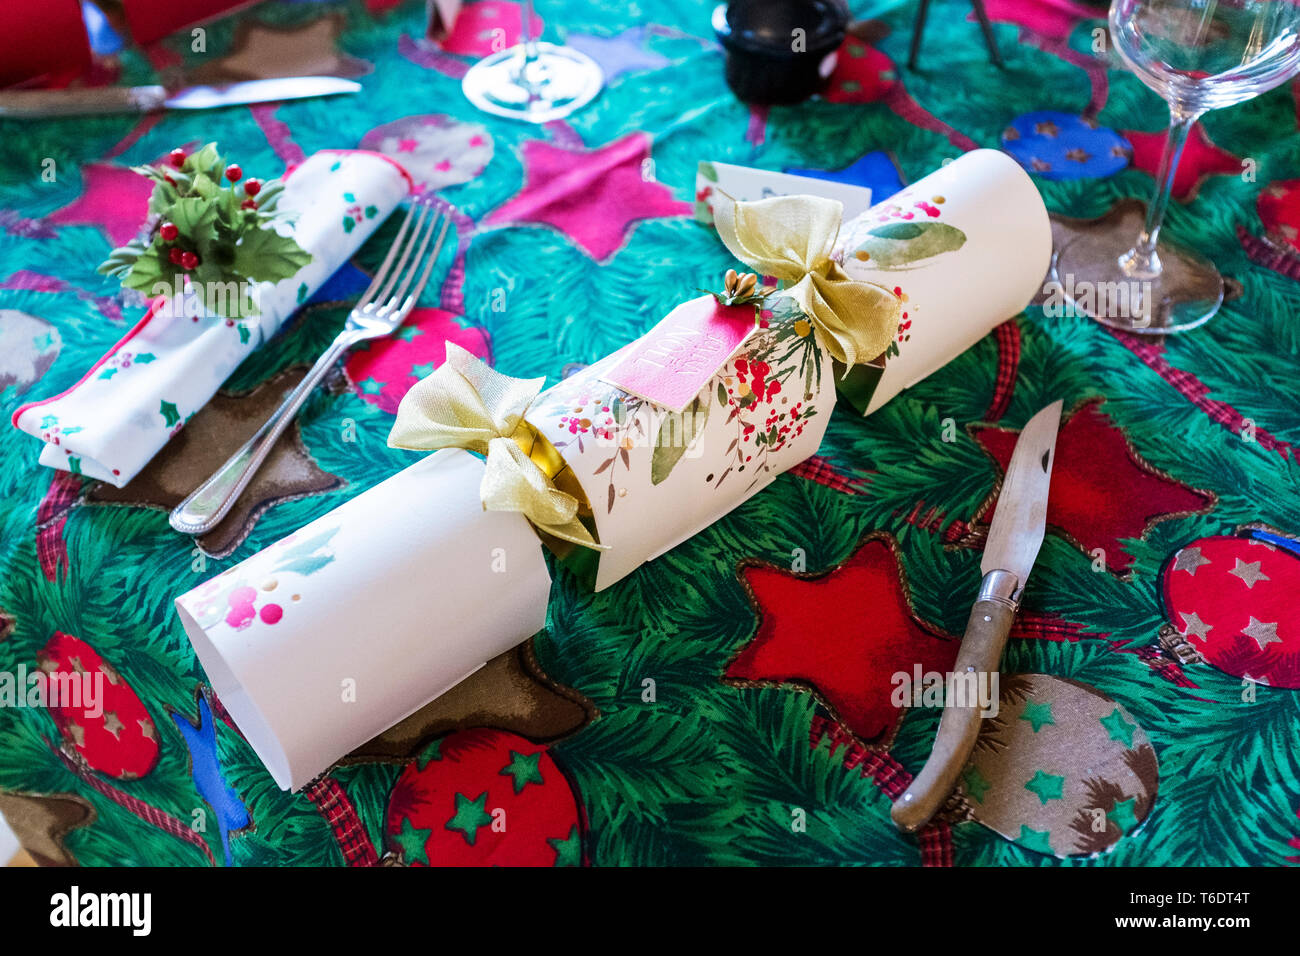 High angle close up of cutlery and white Christmas cracker on green and red table cloth with Christmas motifs. Stock Photo